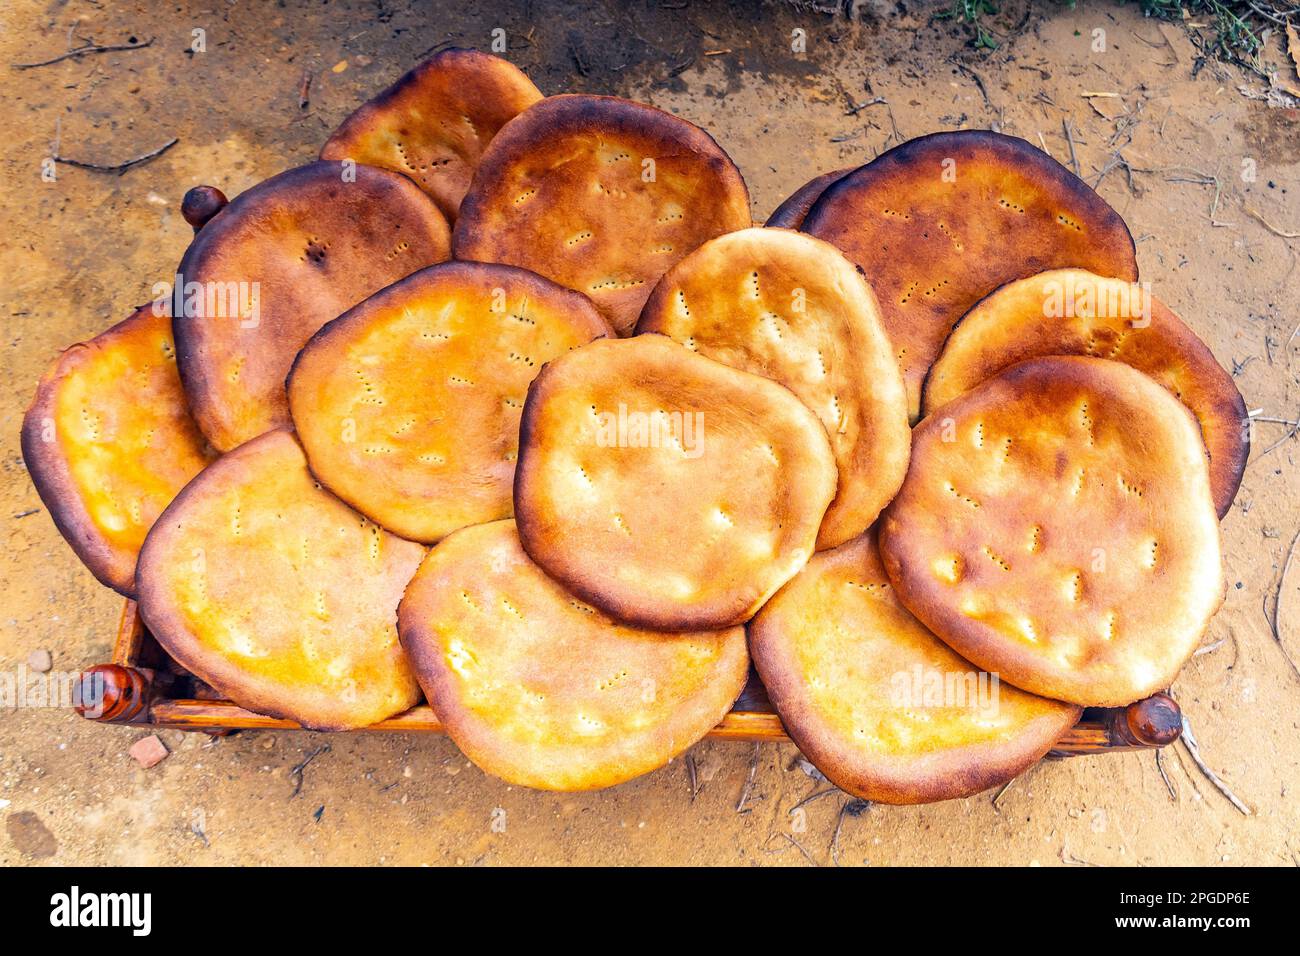 Tabouna and Tandoor Bread: A Delicious Comparison of Traditional Breads Stock Photo